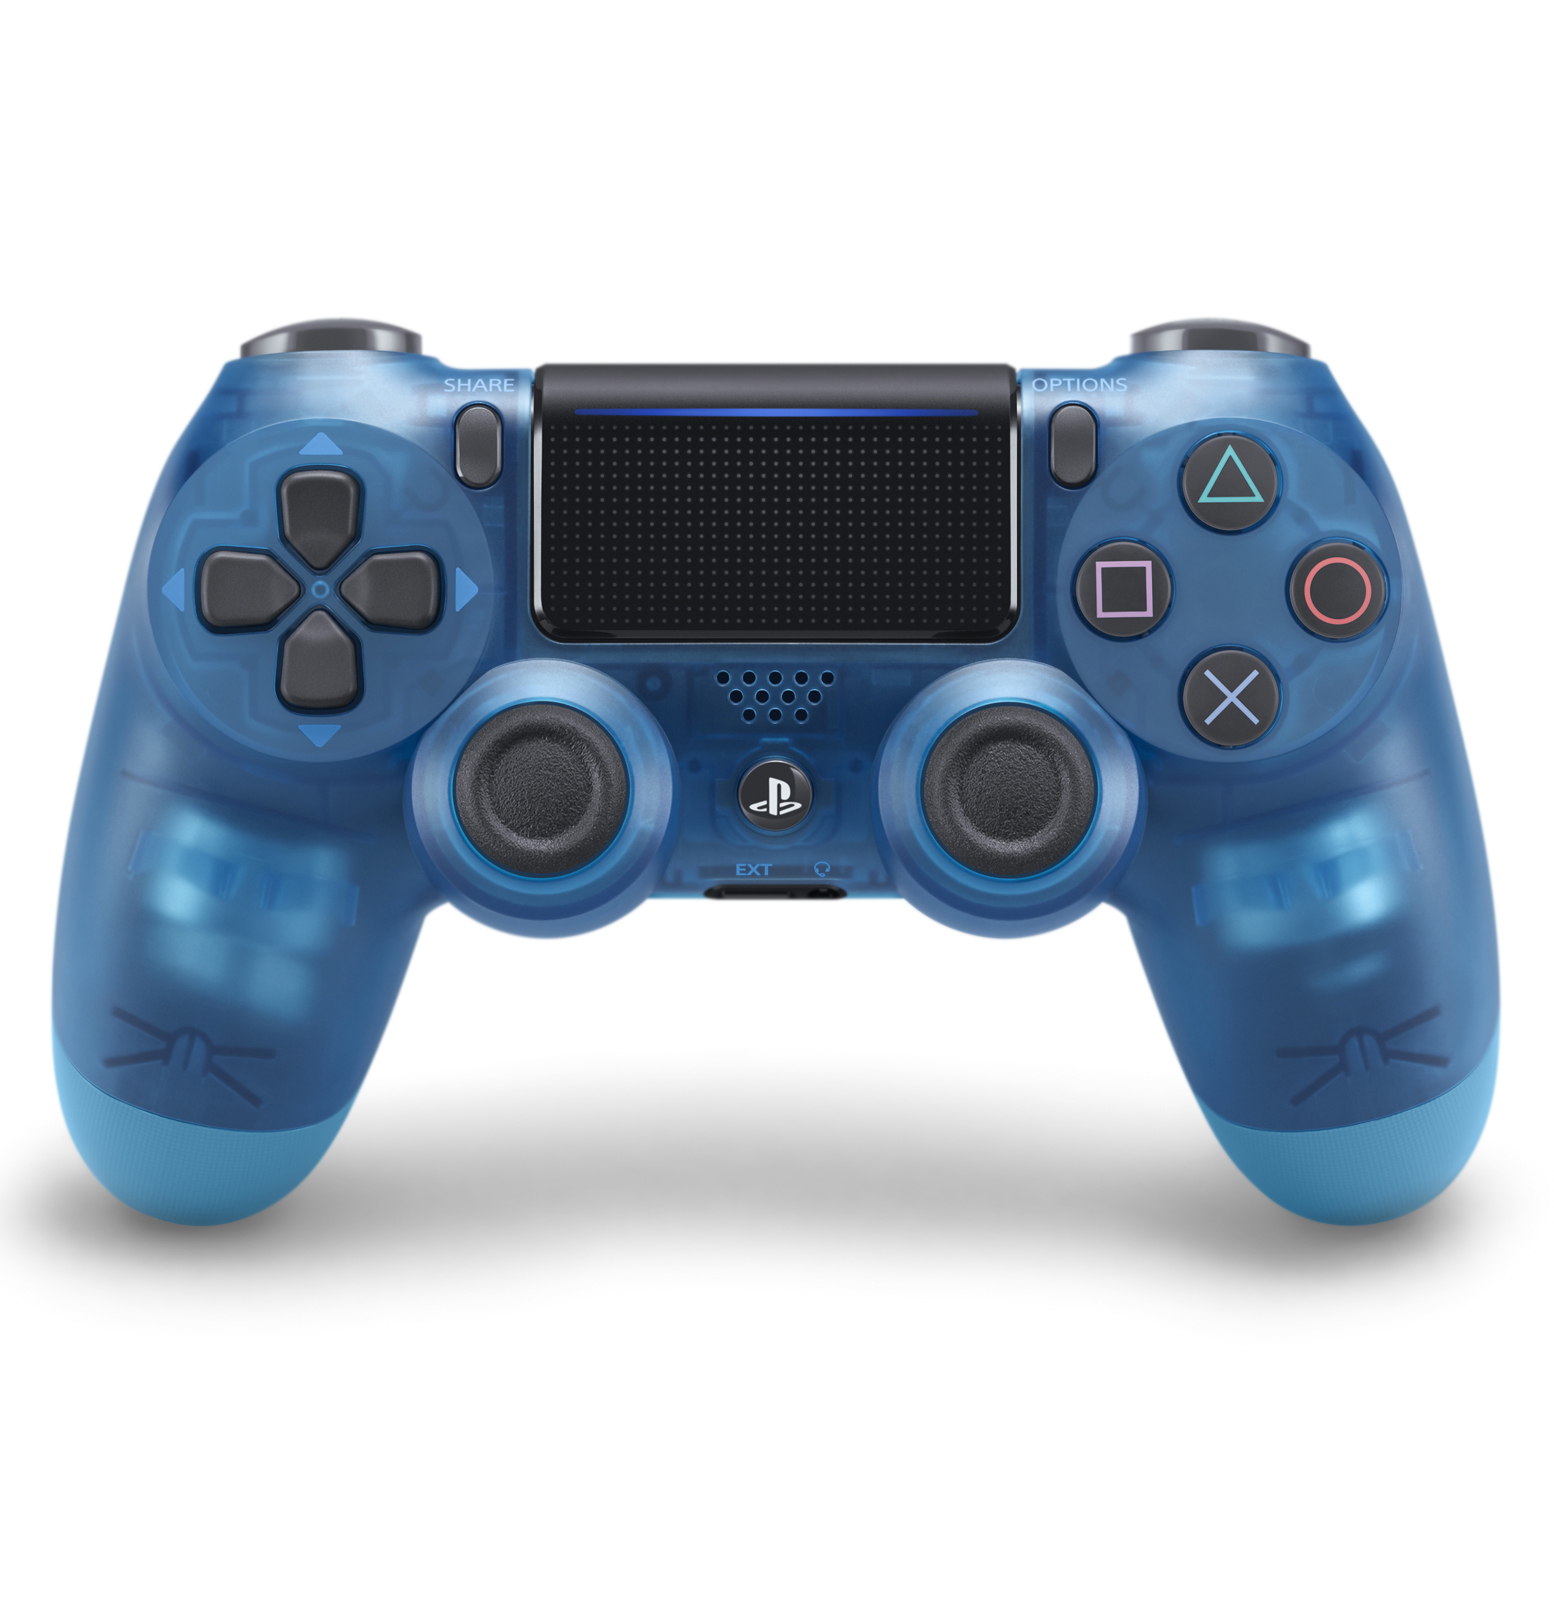 Sony PlayStation 4 DualShock 4 Controller, Blue Crystal, WMT Exclusive - image 1 of 6